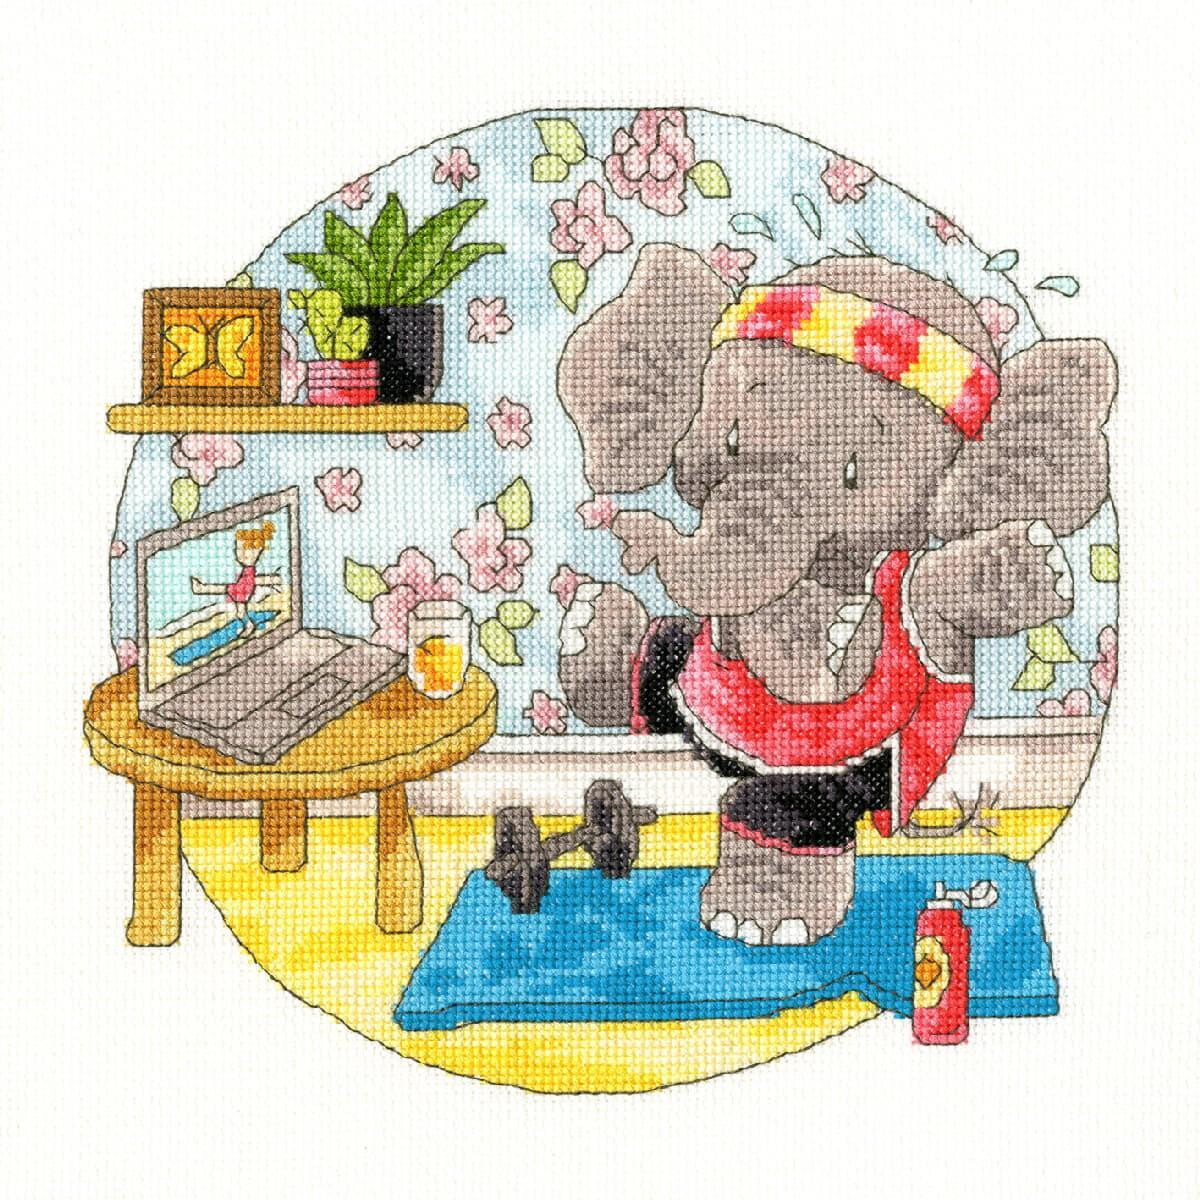 An adorable illustration from Bothy Threads embroidery...